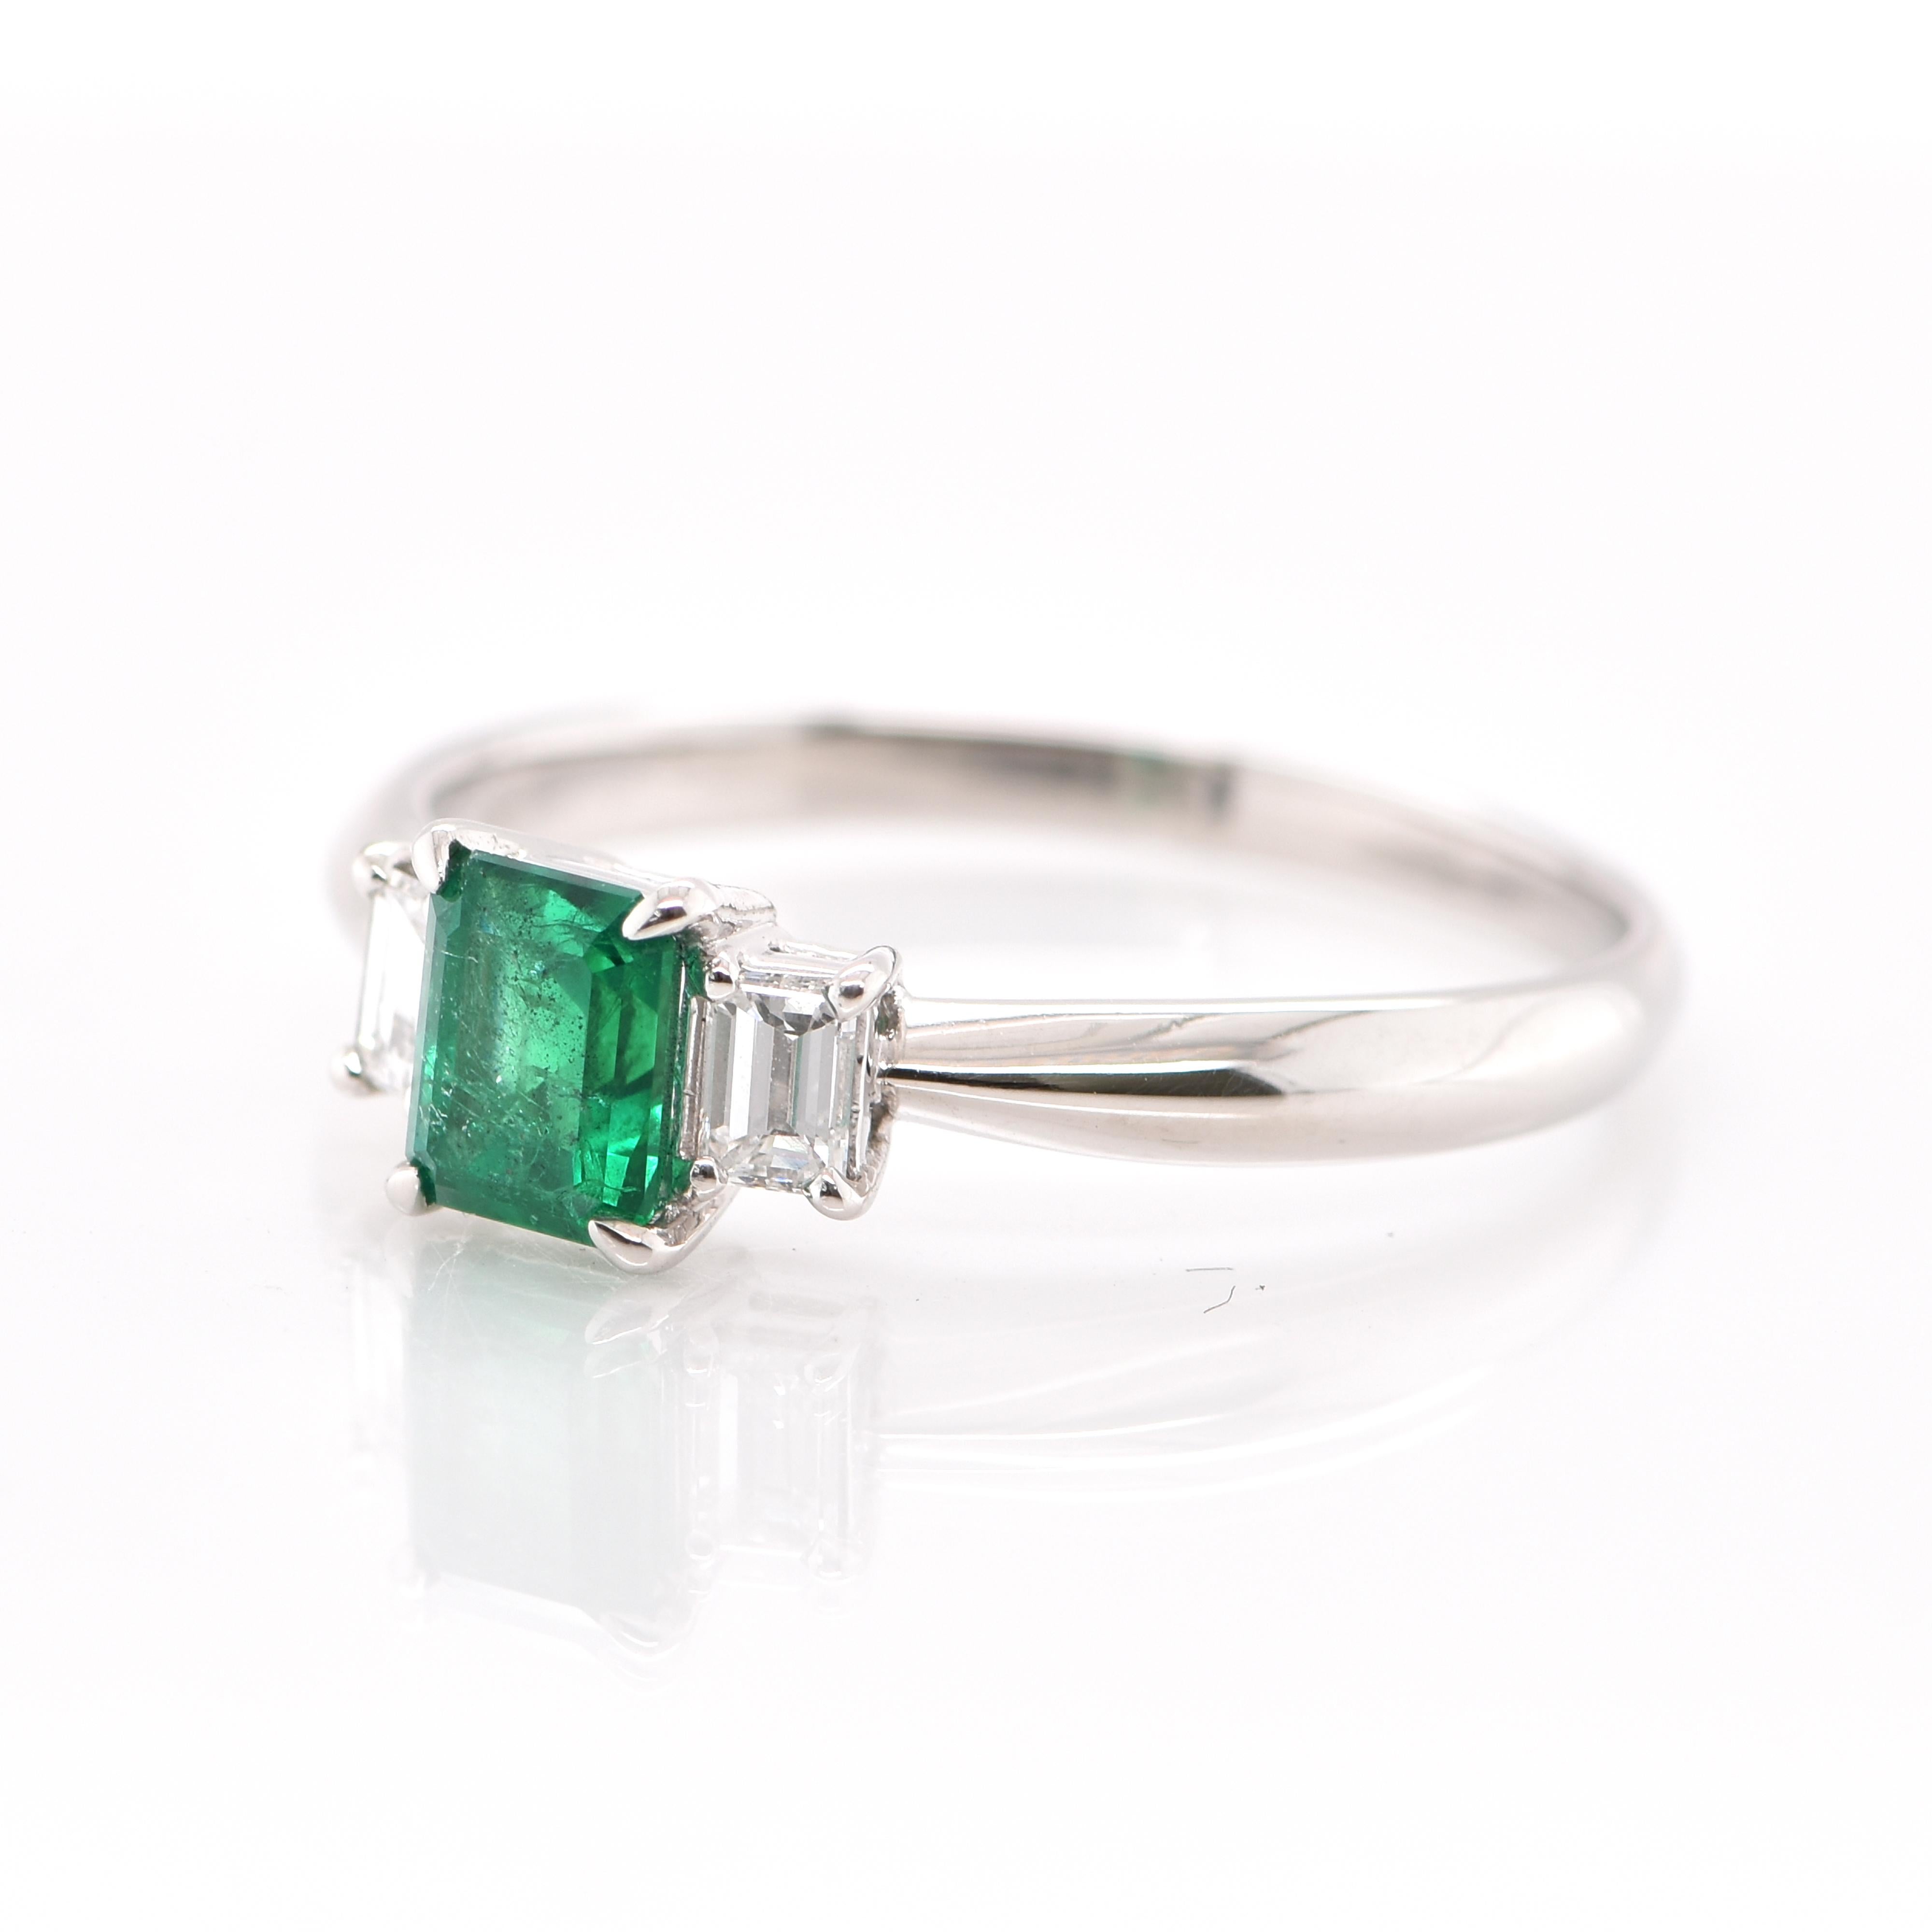 A stunning Engagement Ring featuring a 0.74 Carat Natural Emerald and 0.28 Carats of Diamond Accents set in Platinum. People have admired emerald’s green for thousands of years. Emeralds have always been associated with the lushest landscapes and